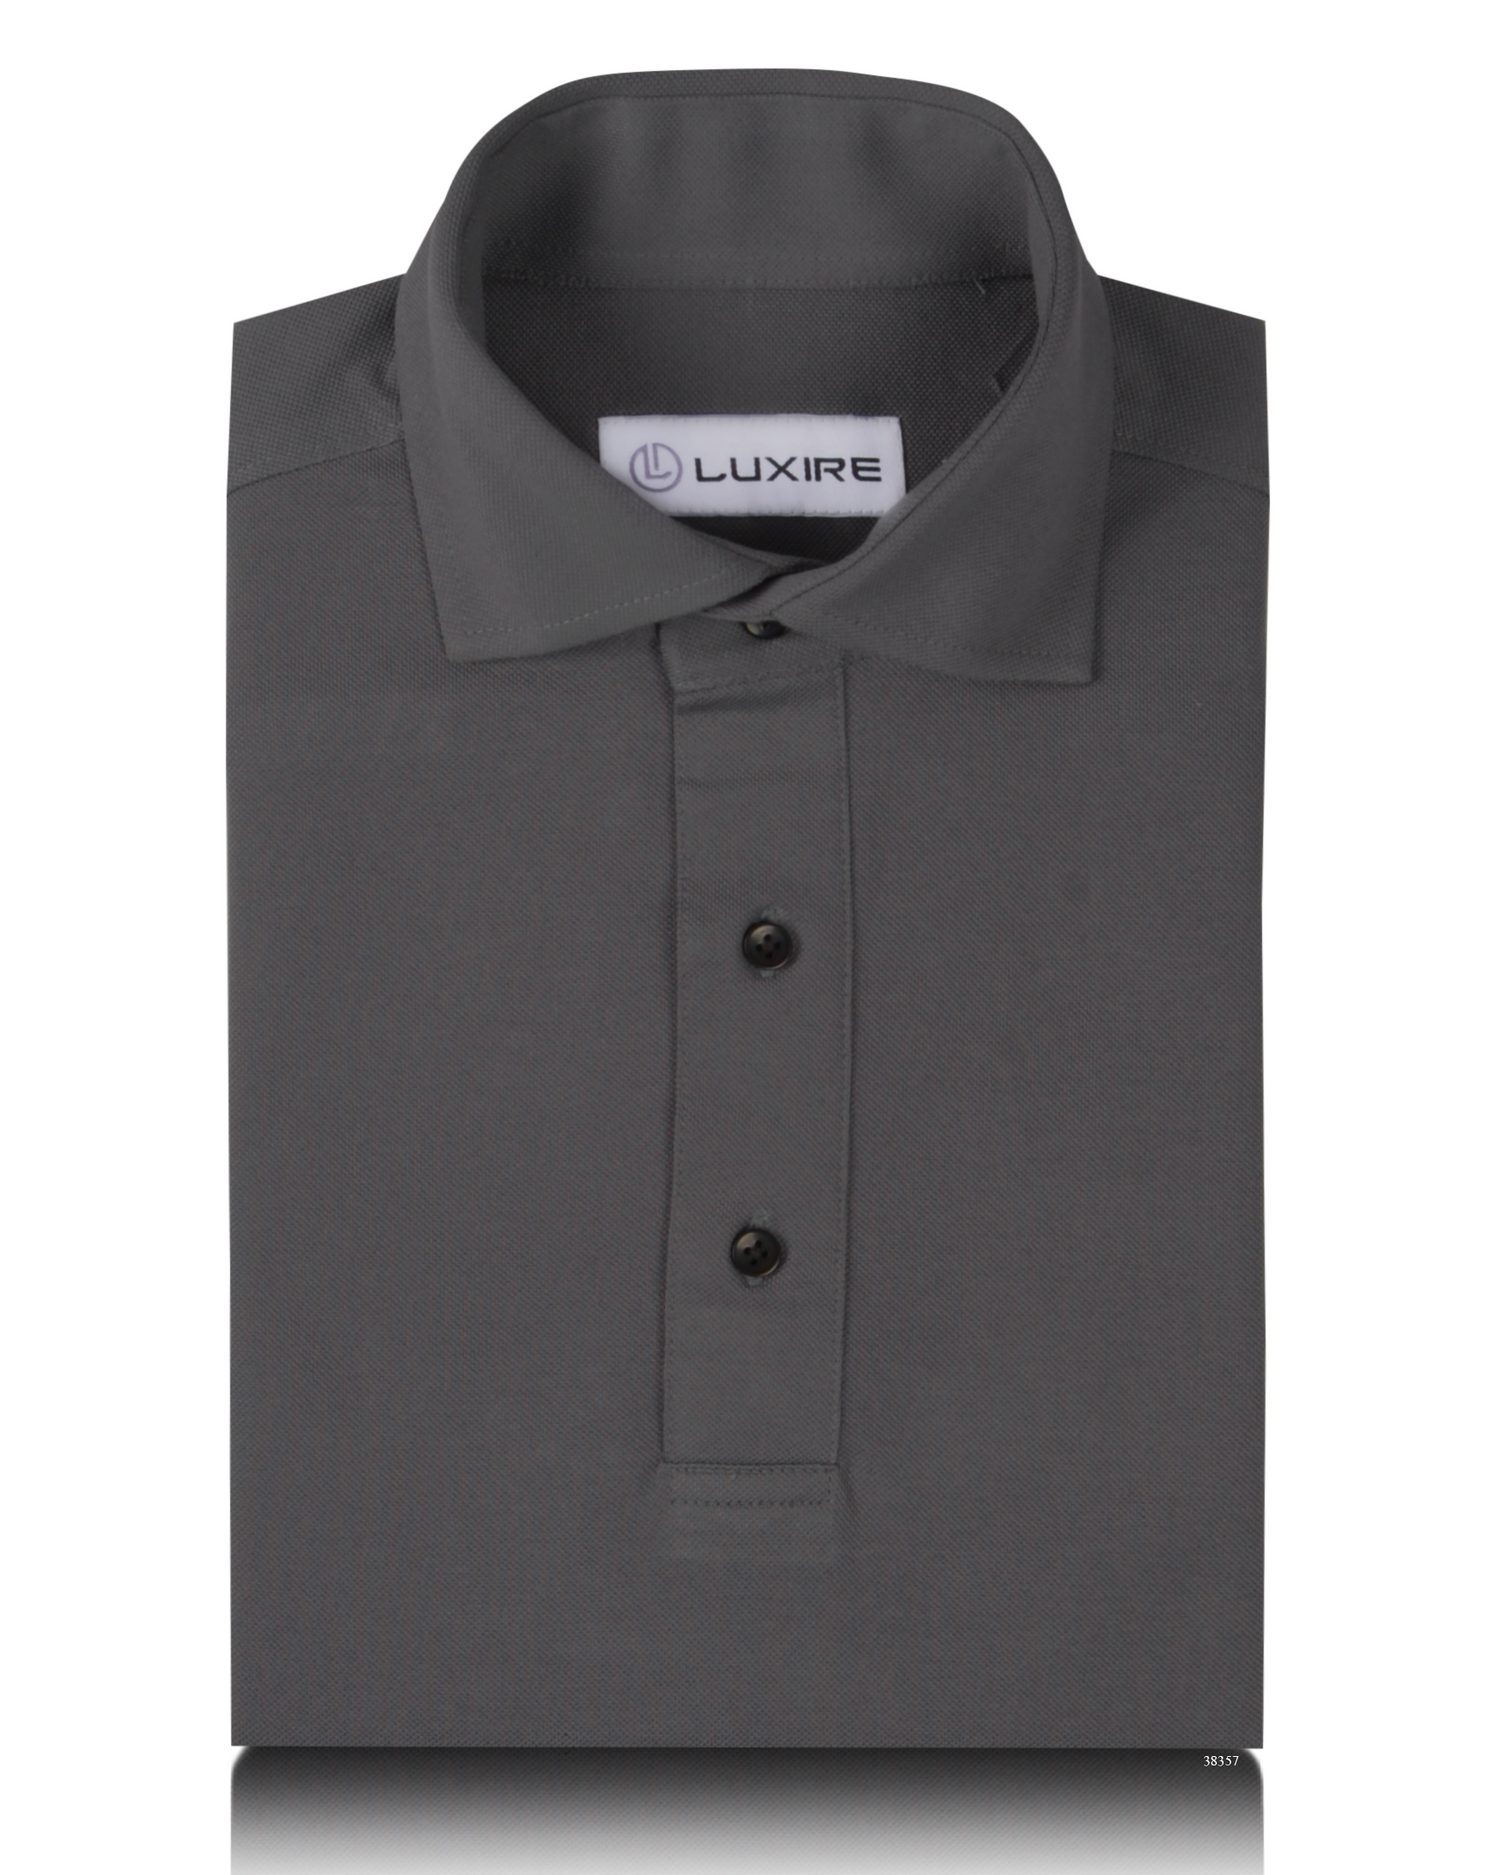 Front of the custom oxford polo shirt for men by Luxire in ash grey